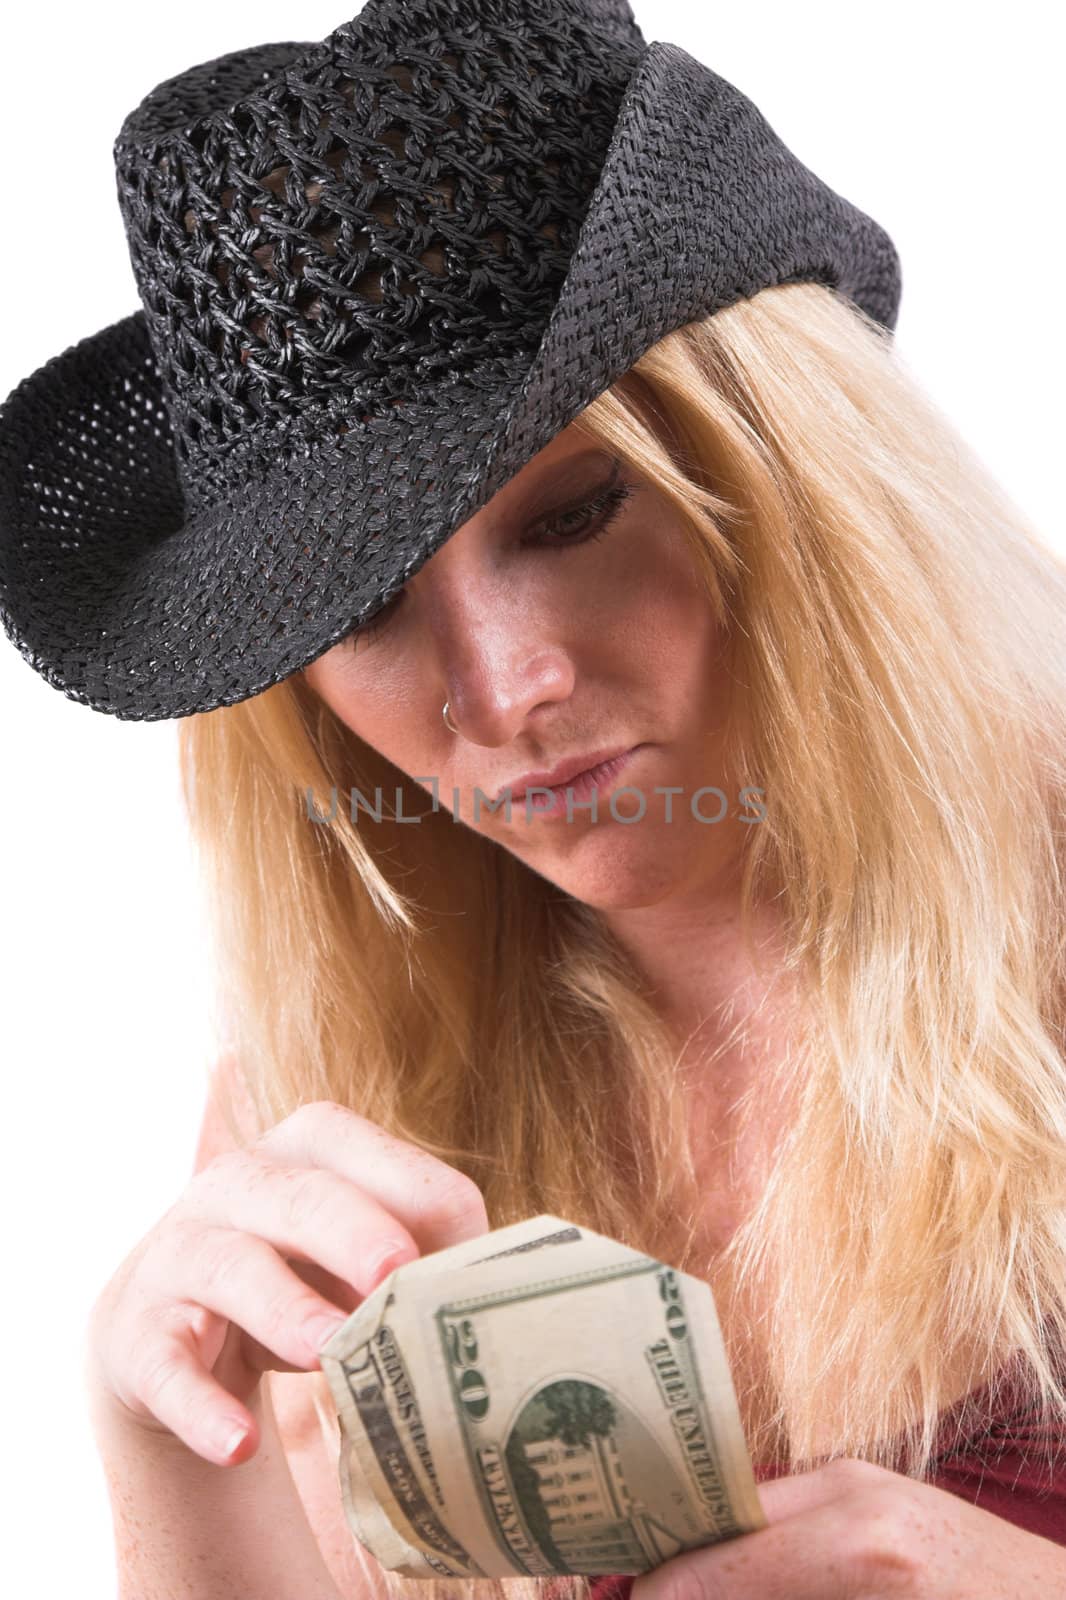 Pretty blond woman with black cowboyhat counting the dollars in her hand